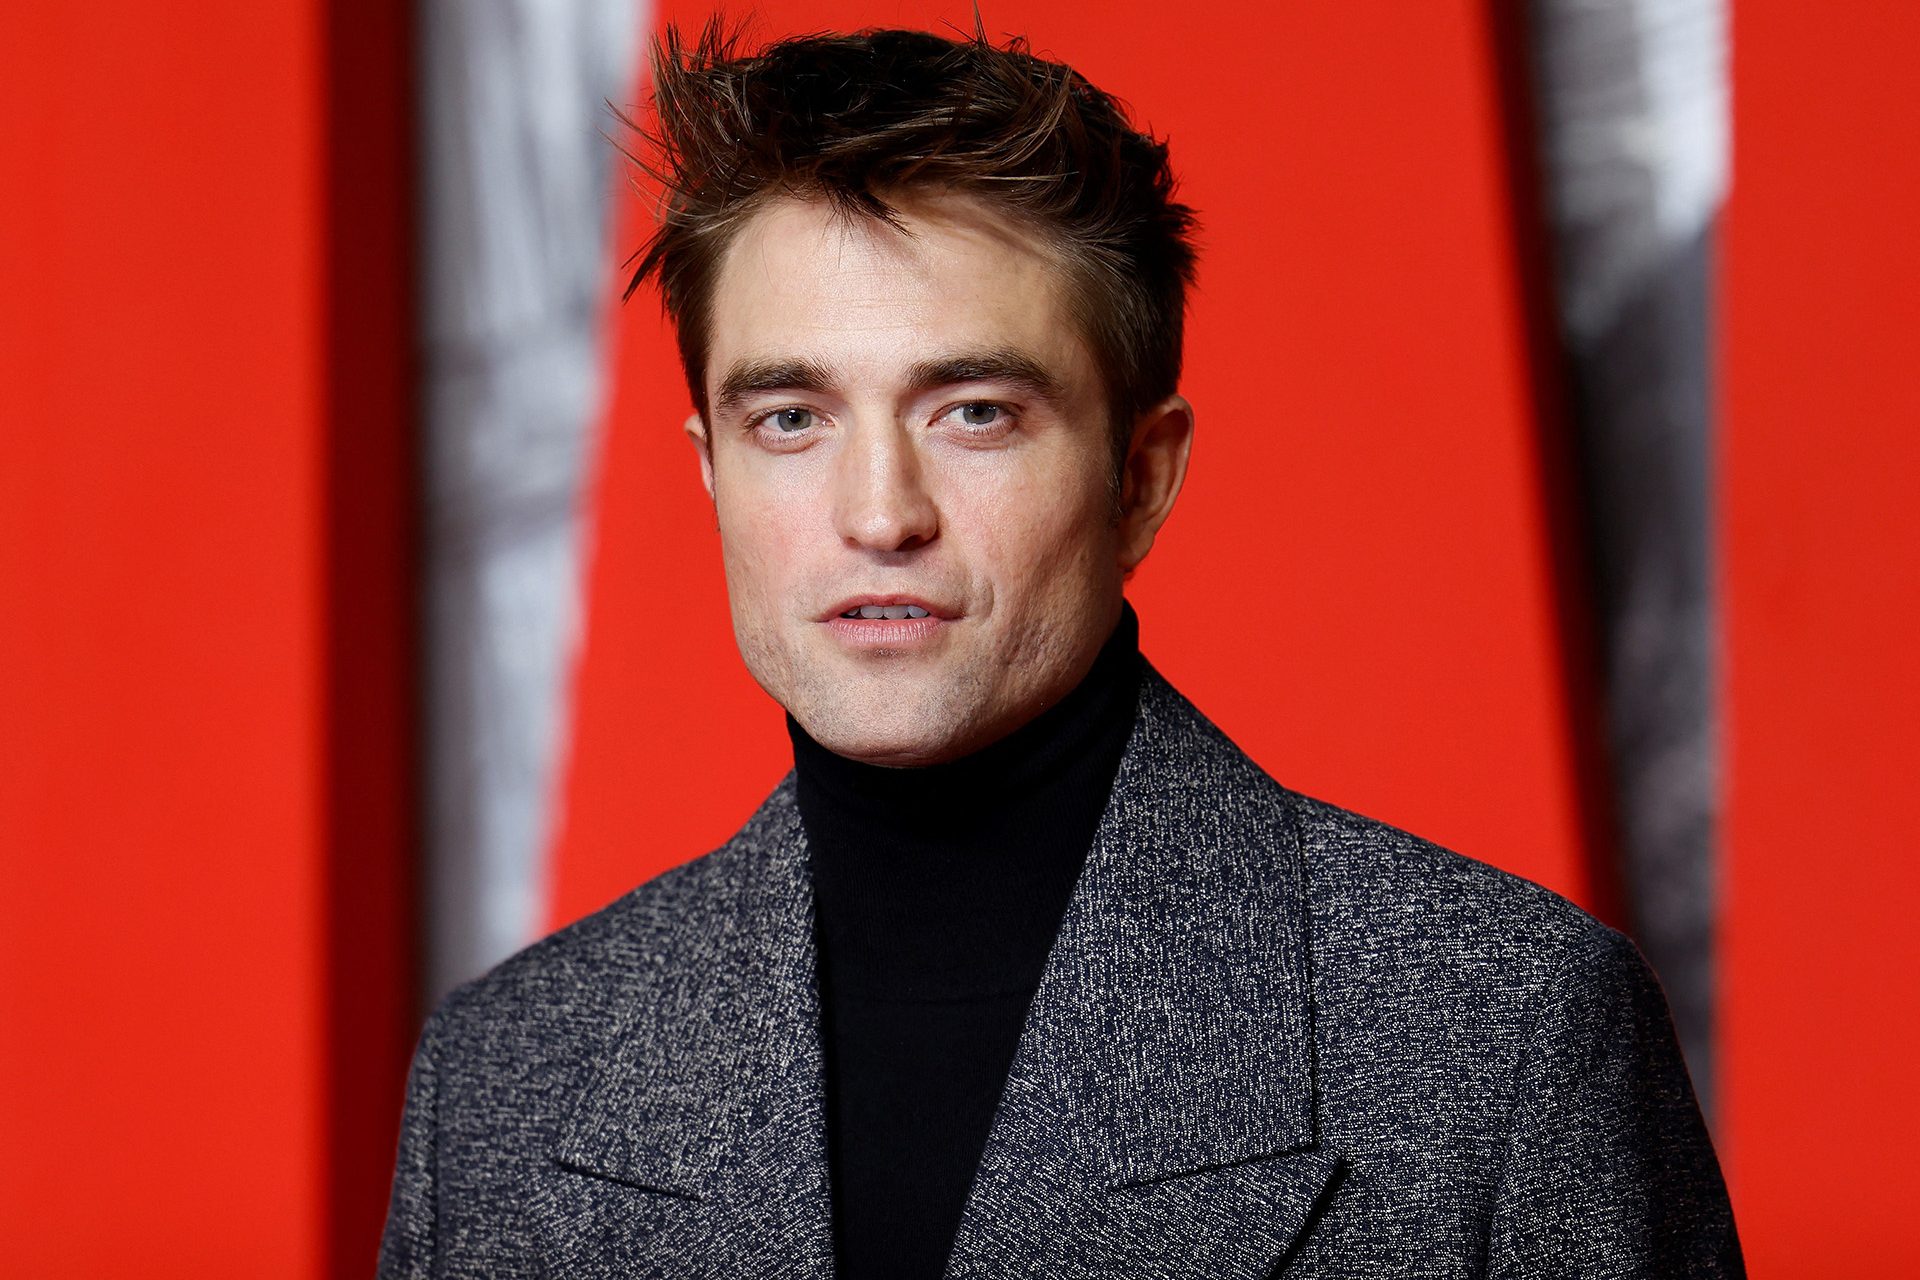 Is Robert Pattinson really related to Count Dracula?